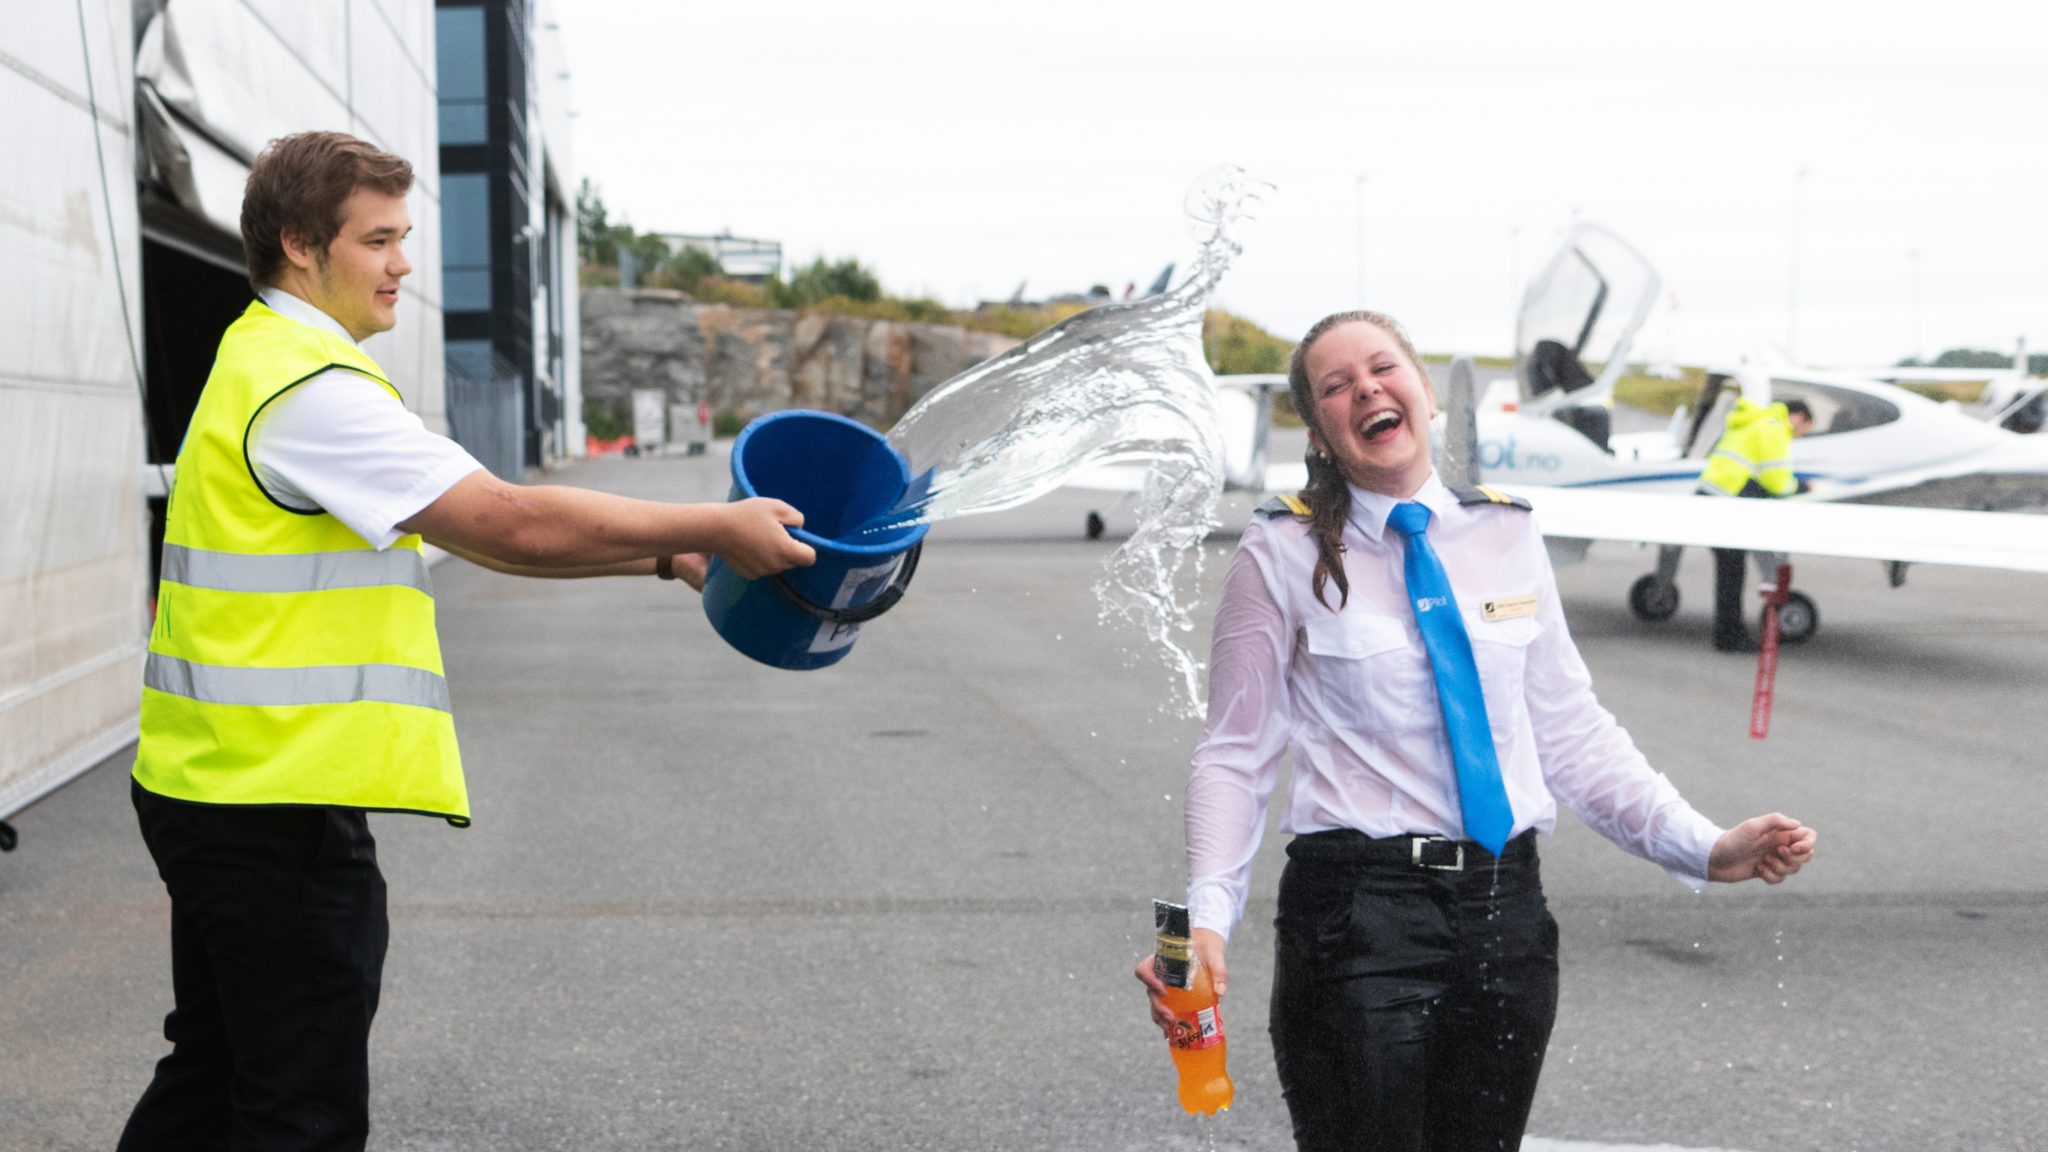 Student Taasaasen is being baptized by her fellow student with buckets of cold water after her very first solo flight